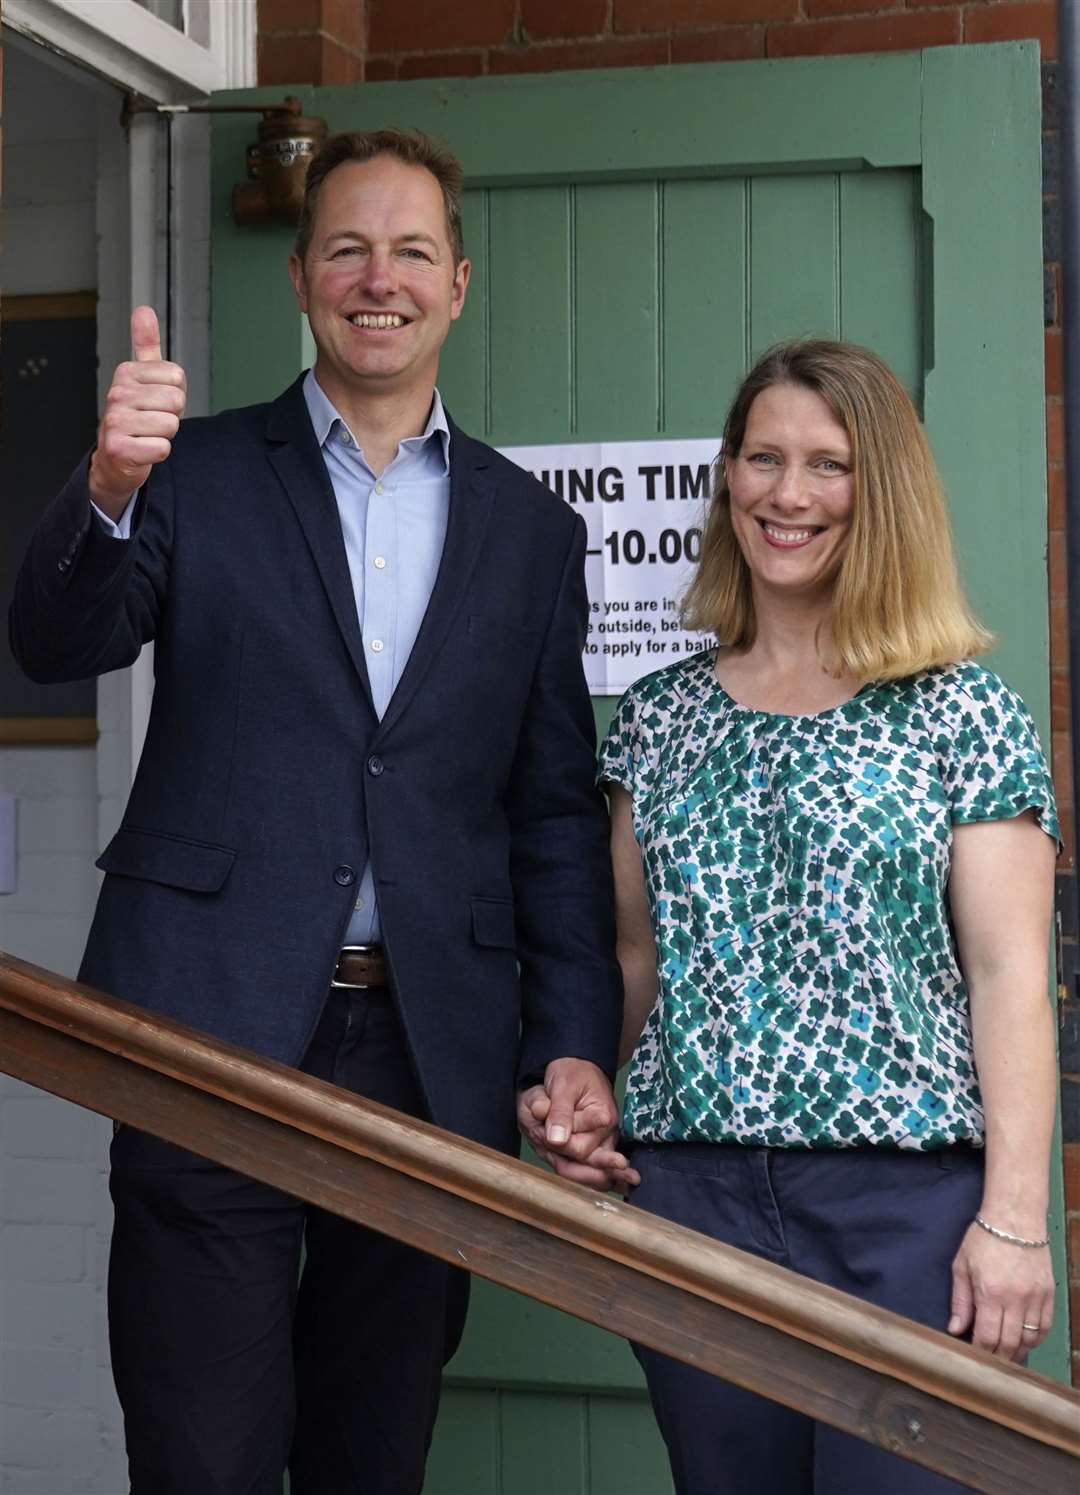 The Liberal Democrats’ by-election candidate Richard Foord (left) poses for a photograph with his wife Kate after they cast their votes (Andrew Matthews/PA)